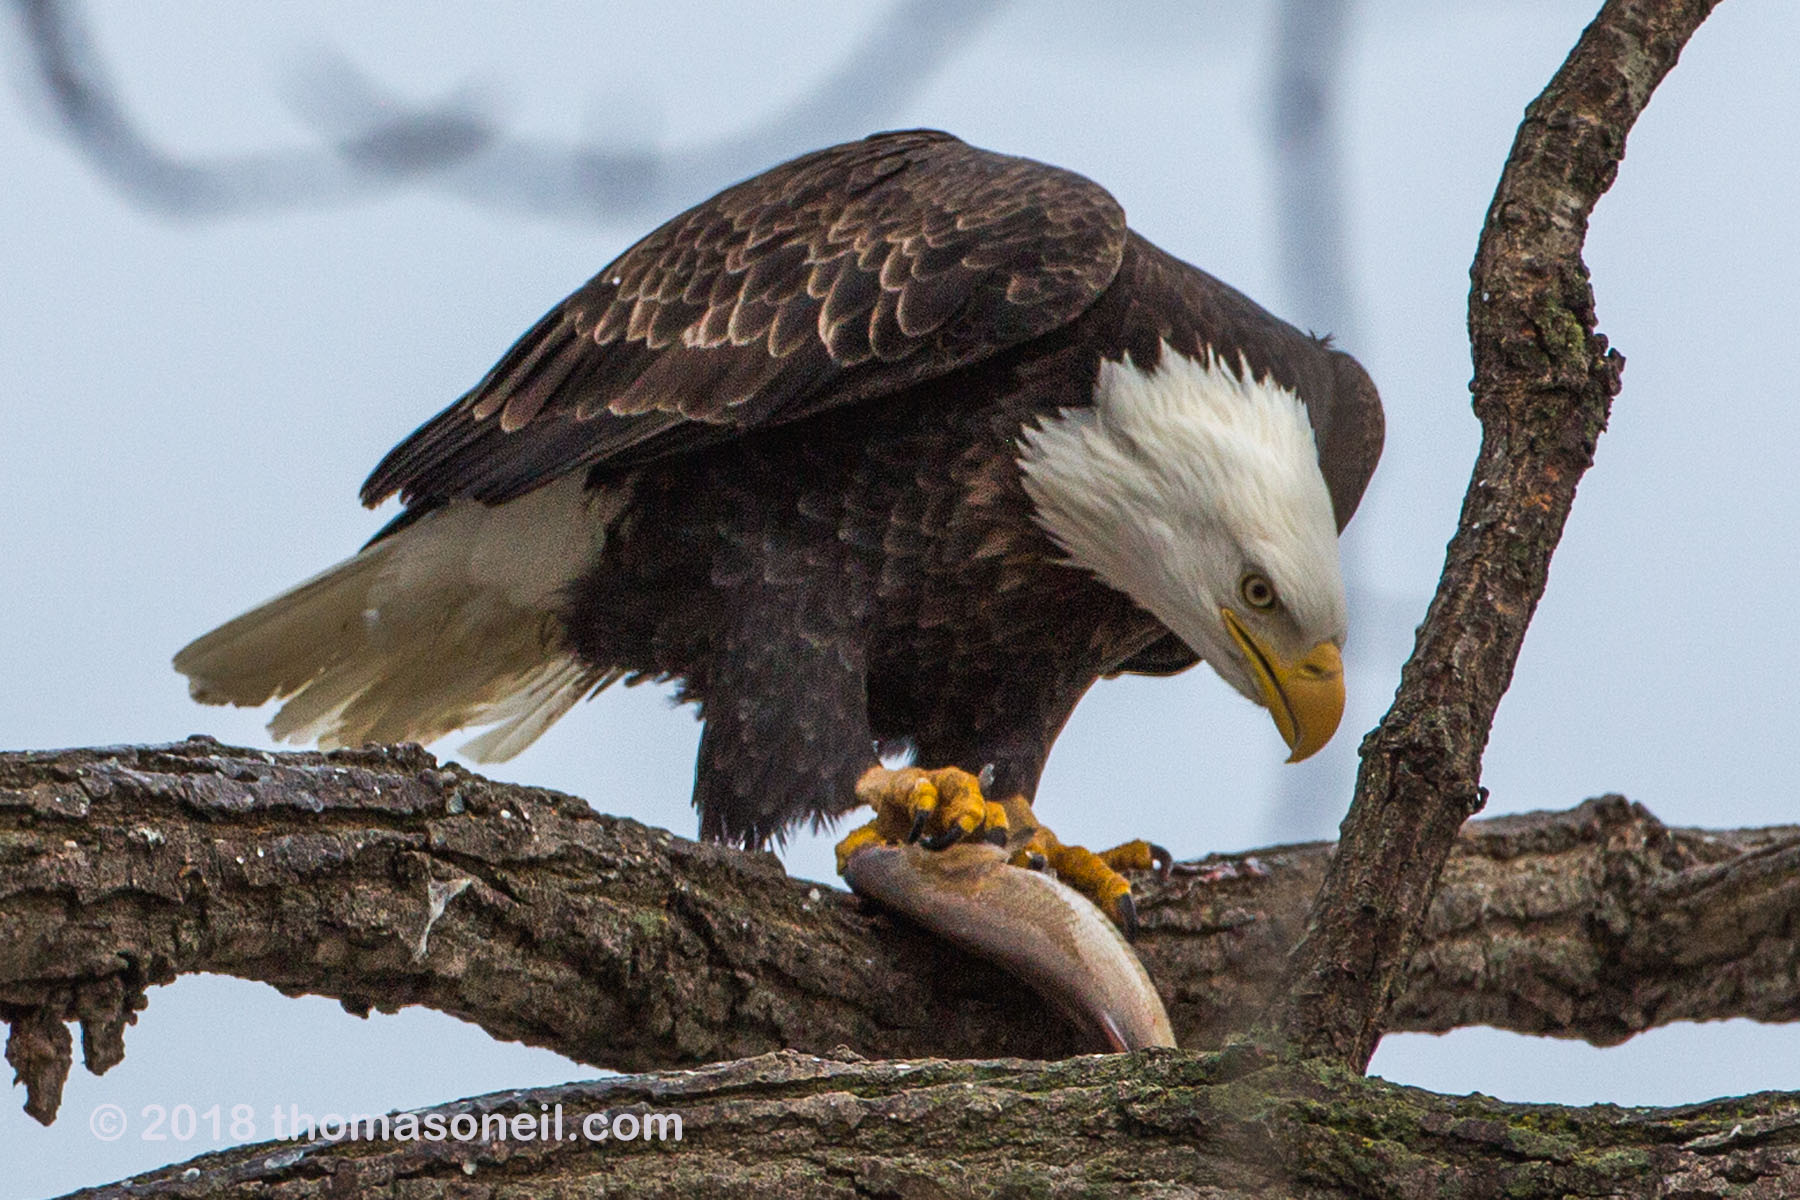 Bald eagle eating fish, 3 of 7 in sequence Keokuk, Iowa, January 2018.  Click for next photo.